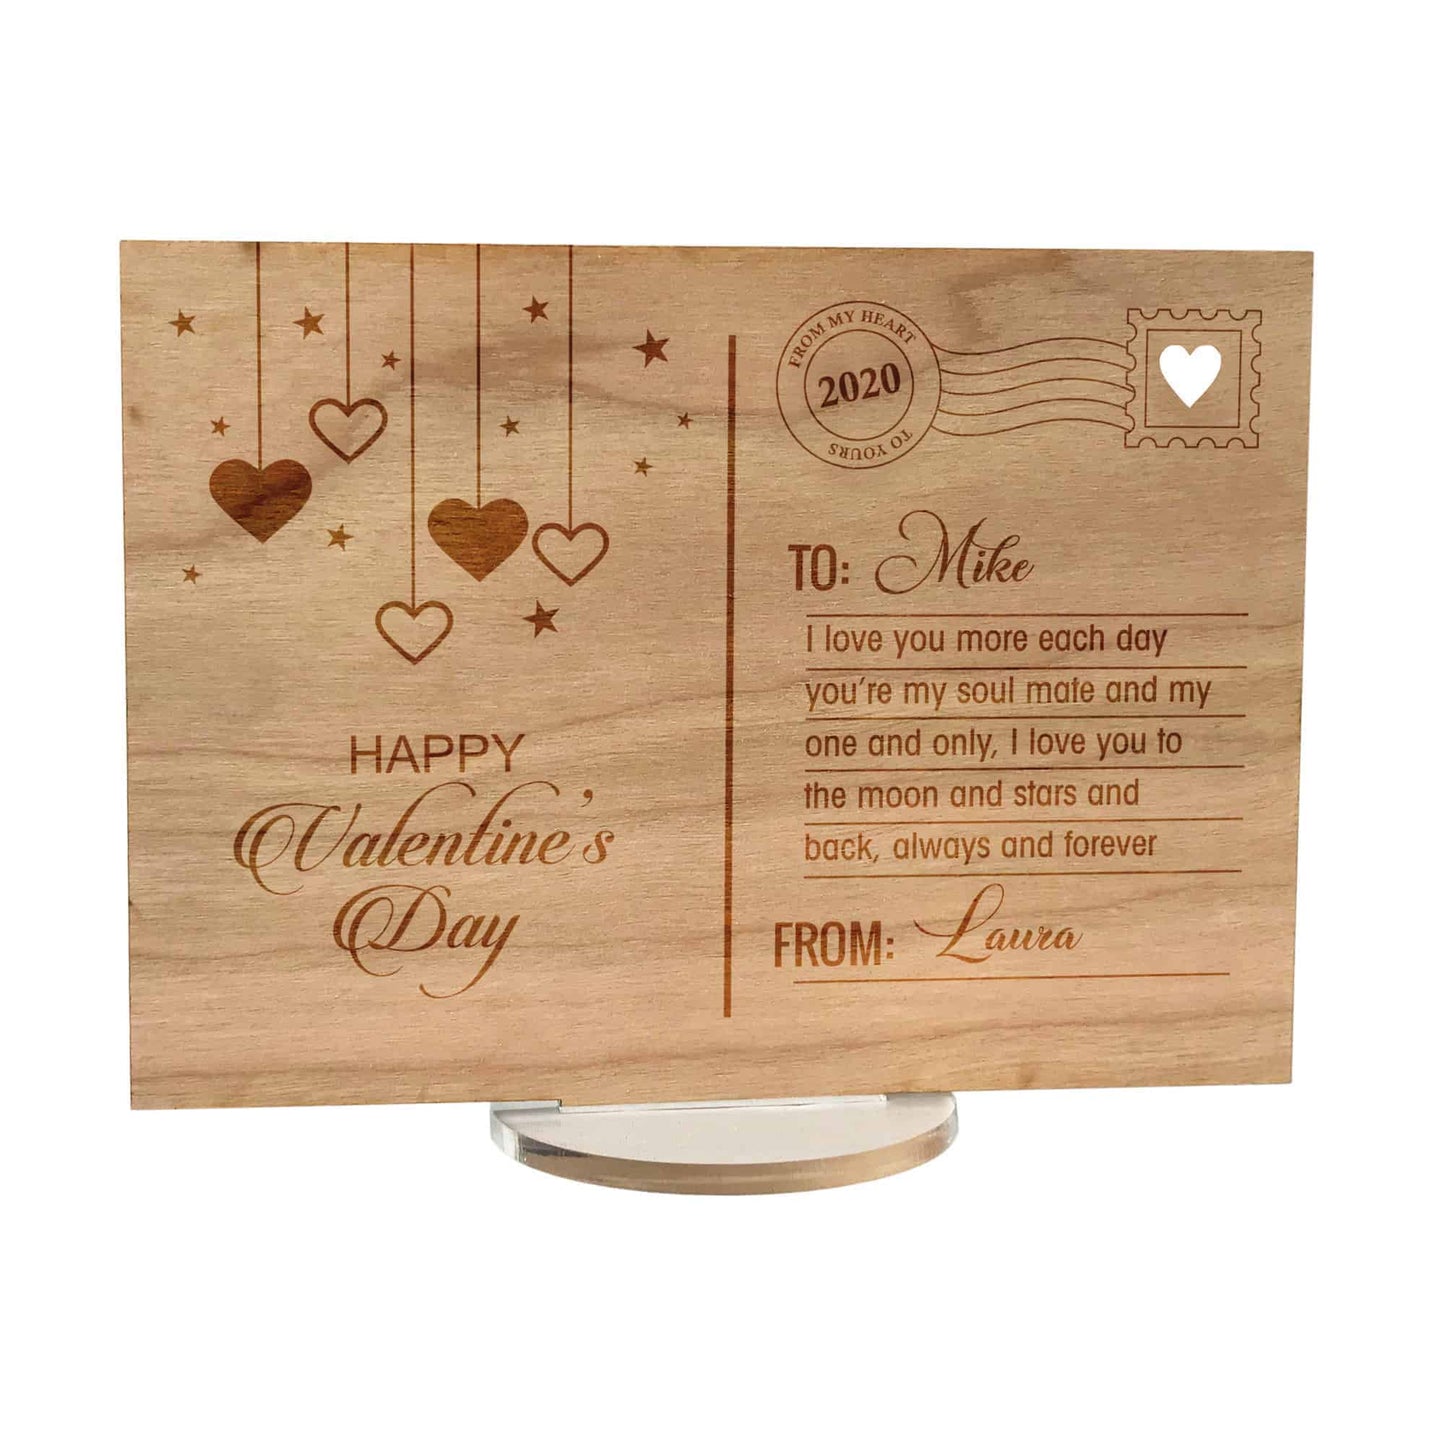 Wooden Engraved Valentines Day Message post card with stand